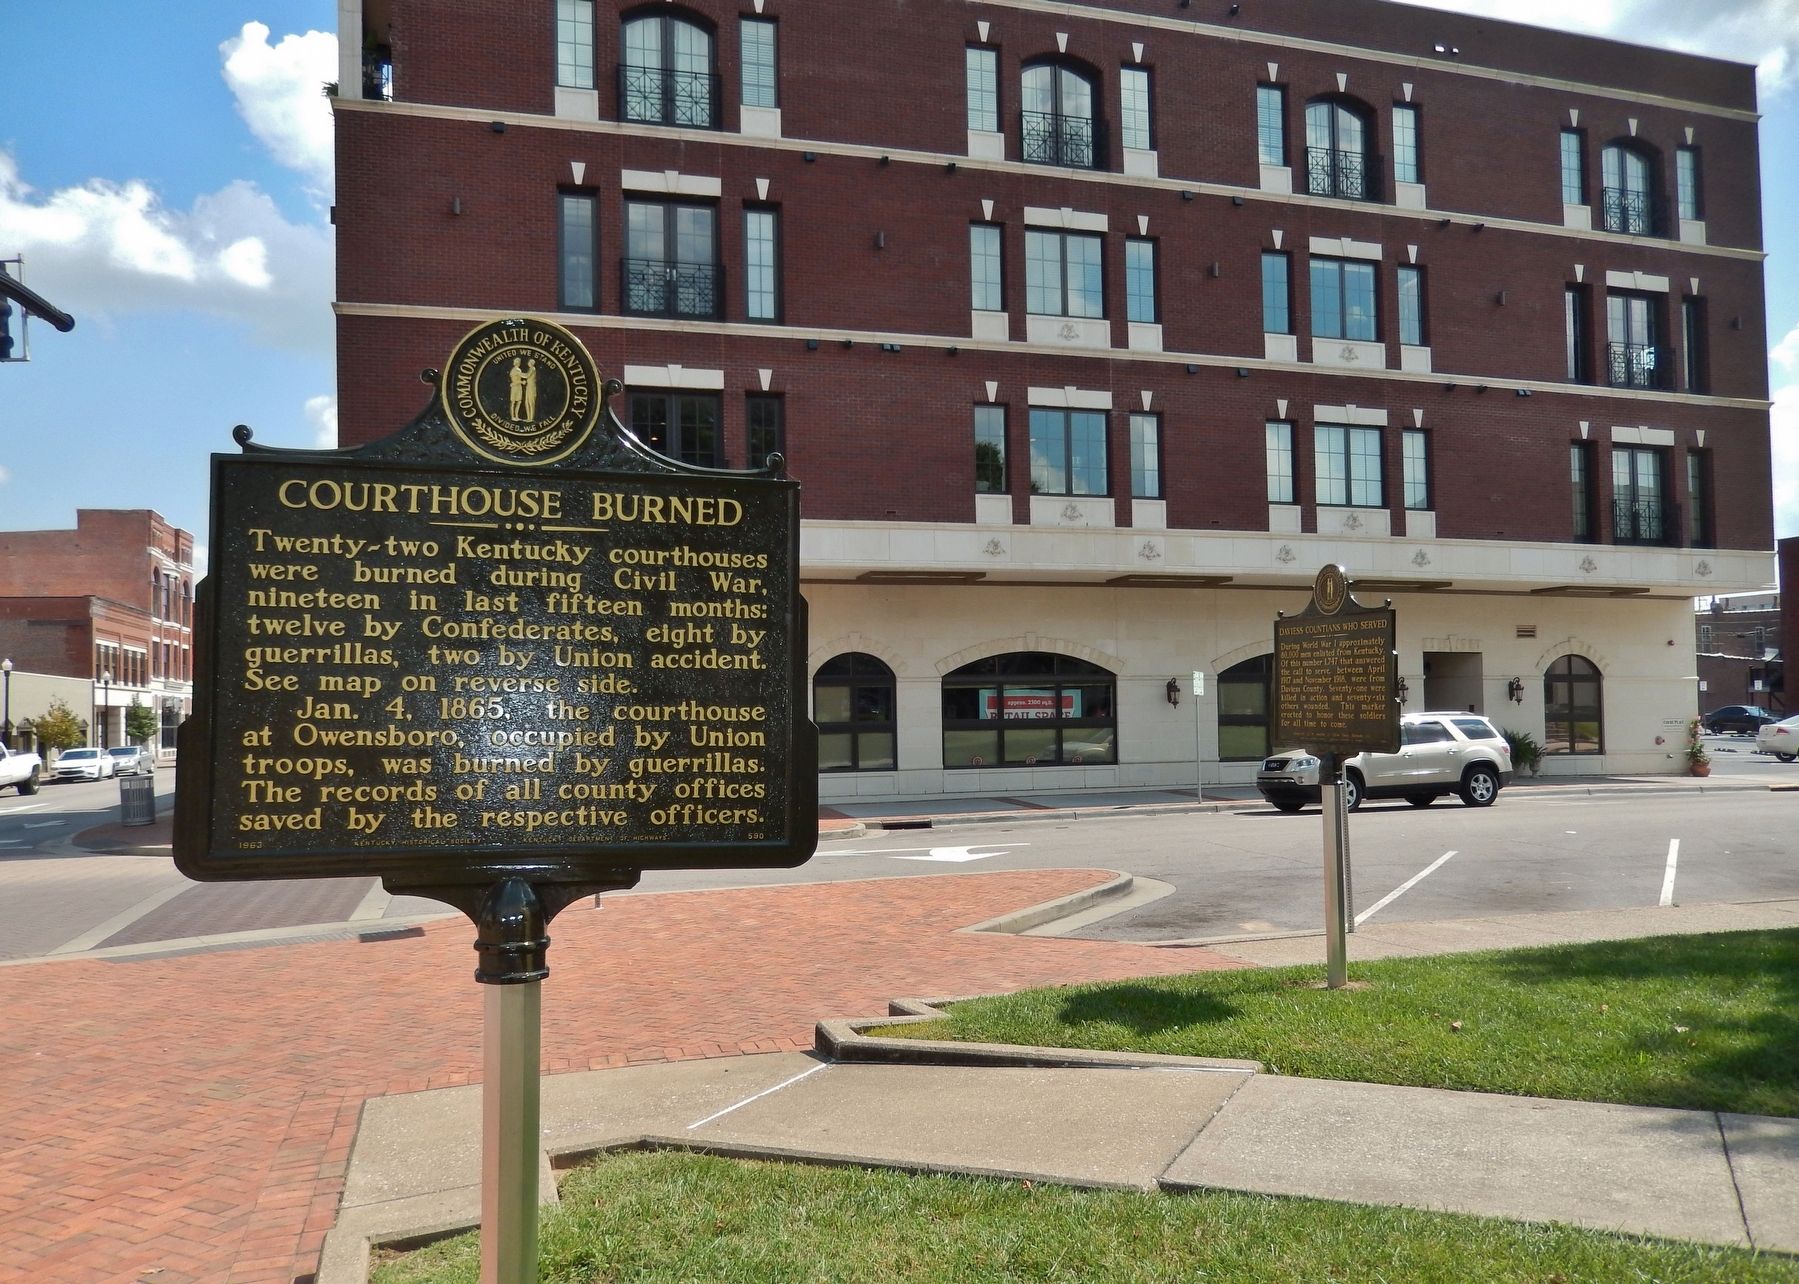 Courthouse Burned Marker (<i>side 1; wide view; related marker visible at right</i>) image. Click for full size.